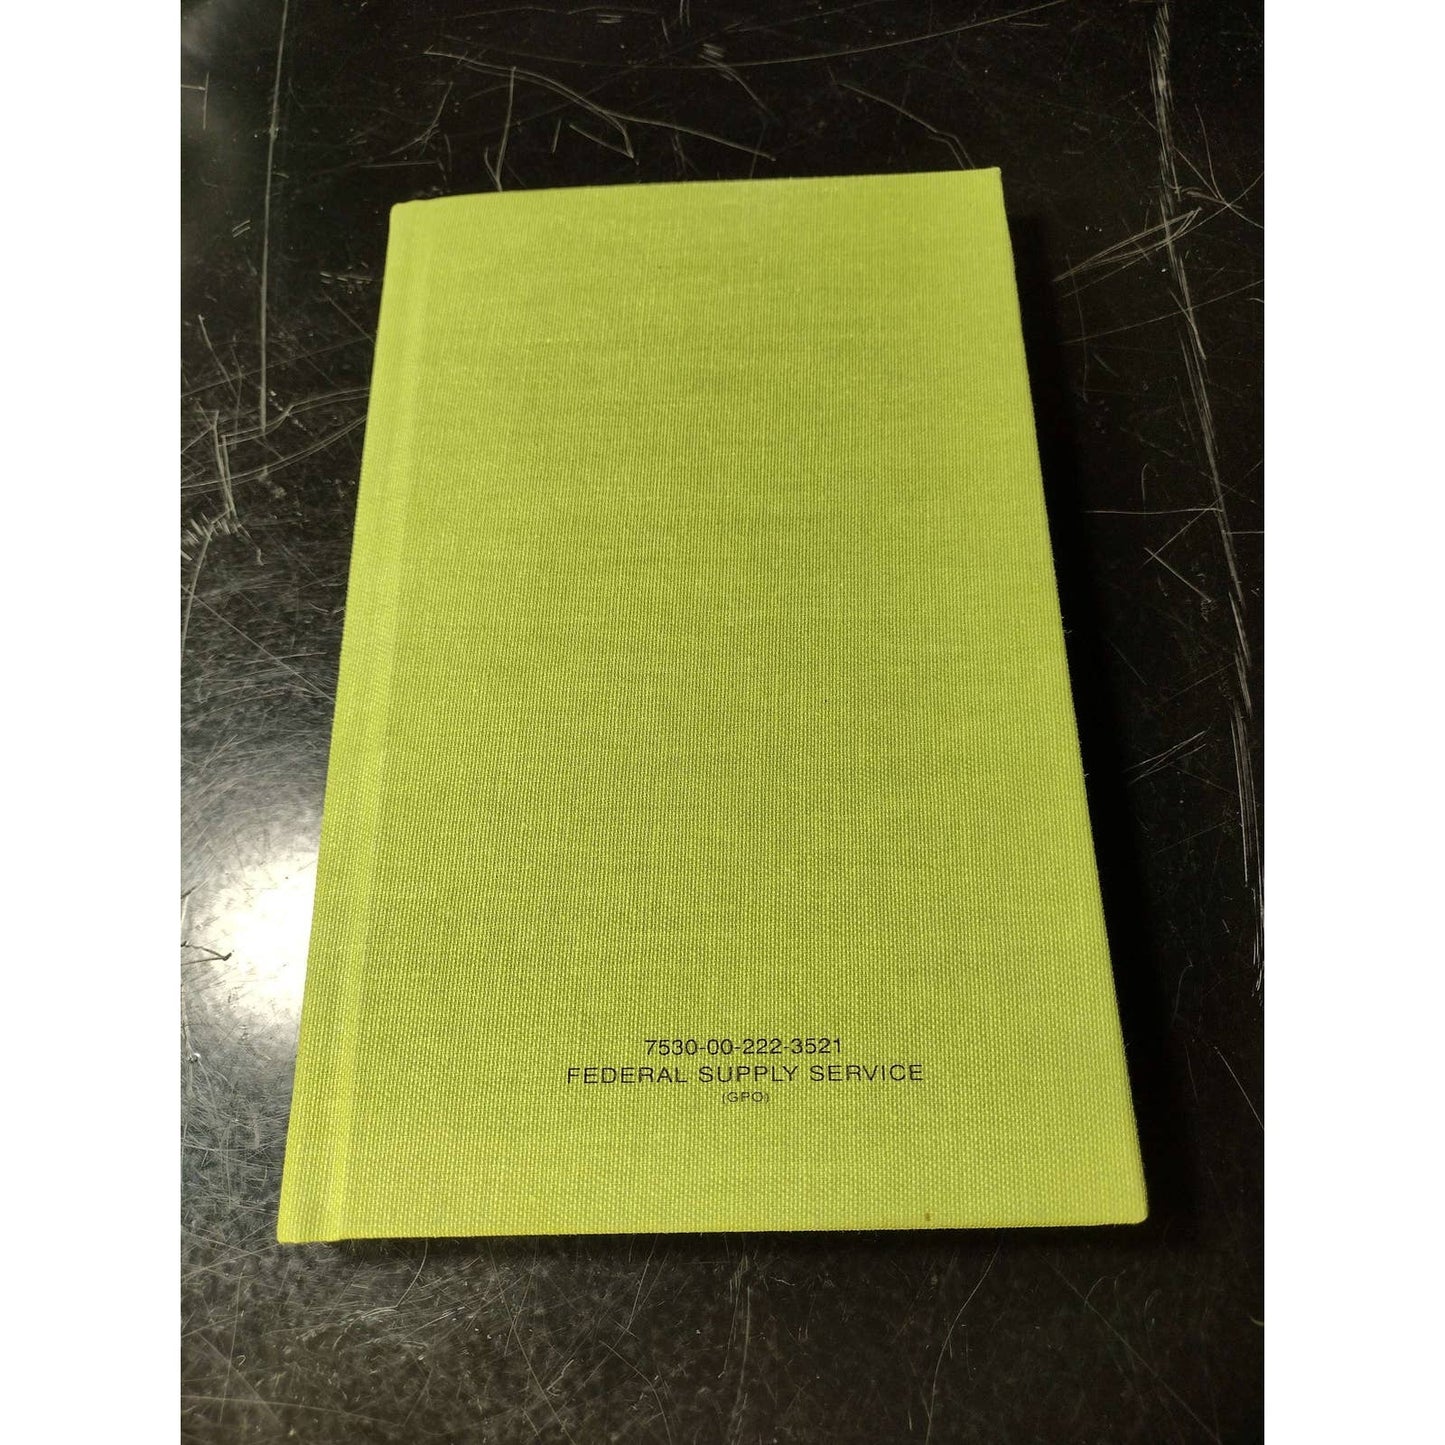 US Military Blank Log Book lined notebook (8'x5') - Federal Supply Service